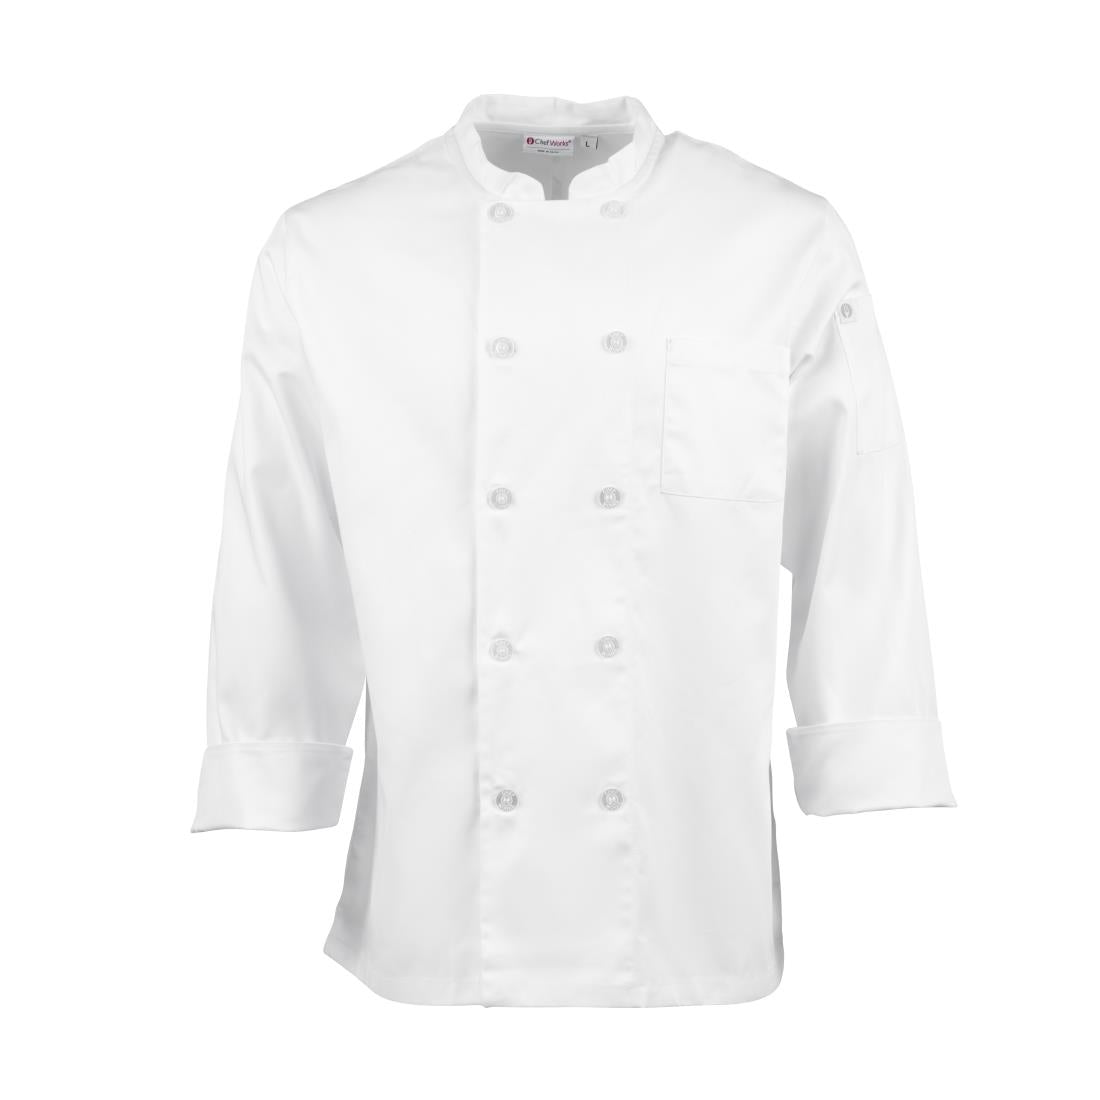 A371-5XL Chef Works Le Mans Chefs Jacket White 5XL JD Catering Equipment Solutions Ltd